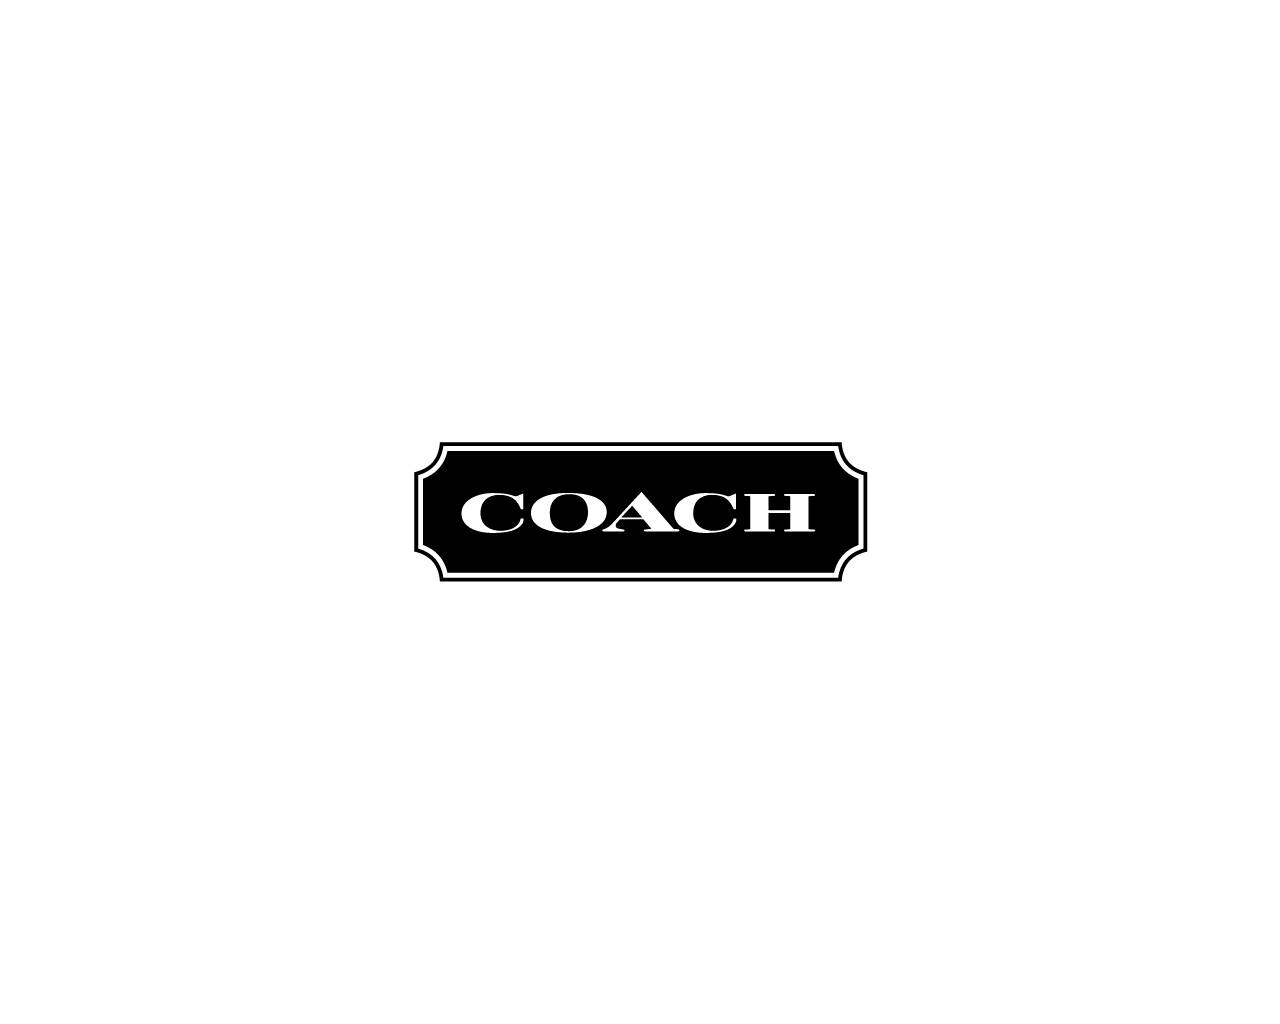 Coach 1280X1024 Wallpaper and Background Image